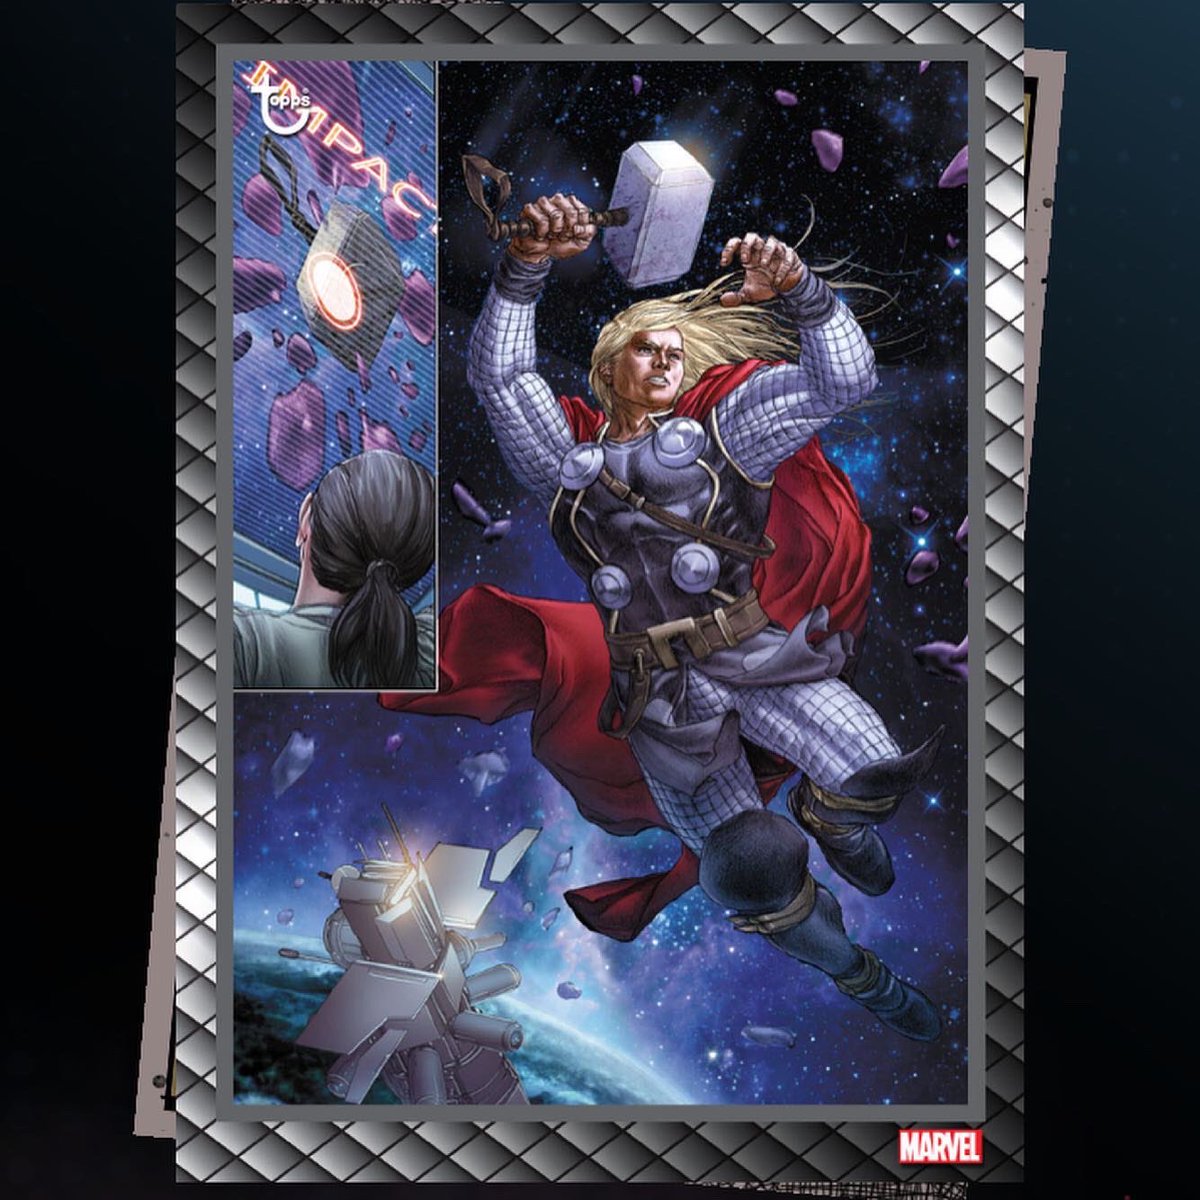 My Thor designs are up on the Topps Marvel app. You can find these designs and all their variants in The Always Astonishing Thor set.
#topps #nonsports #marvel #disney #graphicdesign #tradingcards #nft #toppsdigital #thor #femaleartist #toppsmarvelapp #horseheadnebula https://t.co/2kQ3NwTOiD